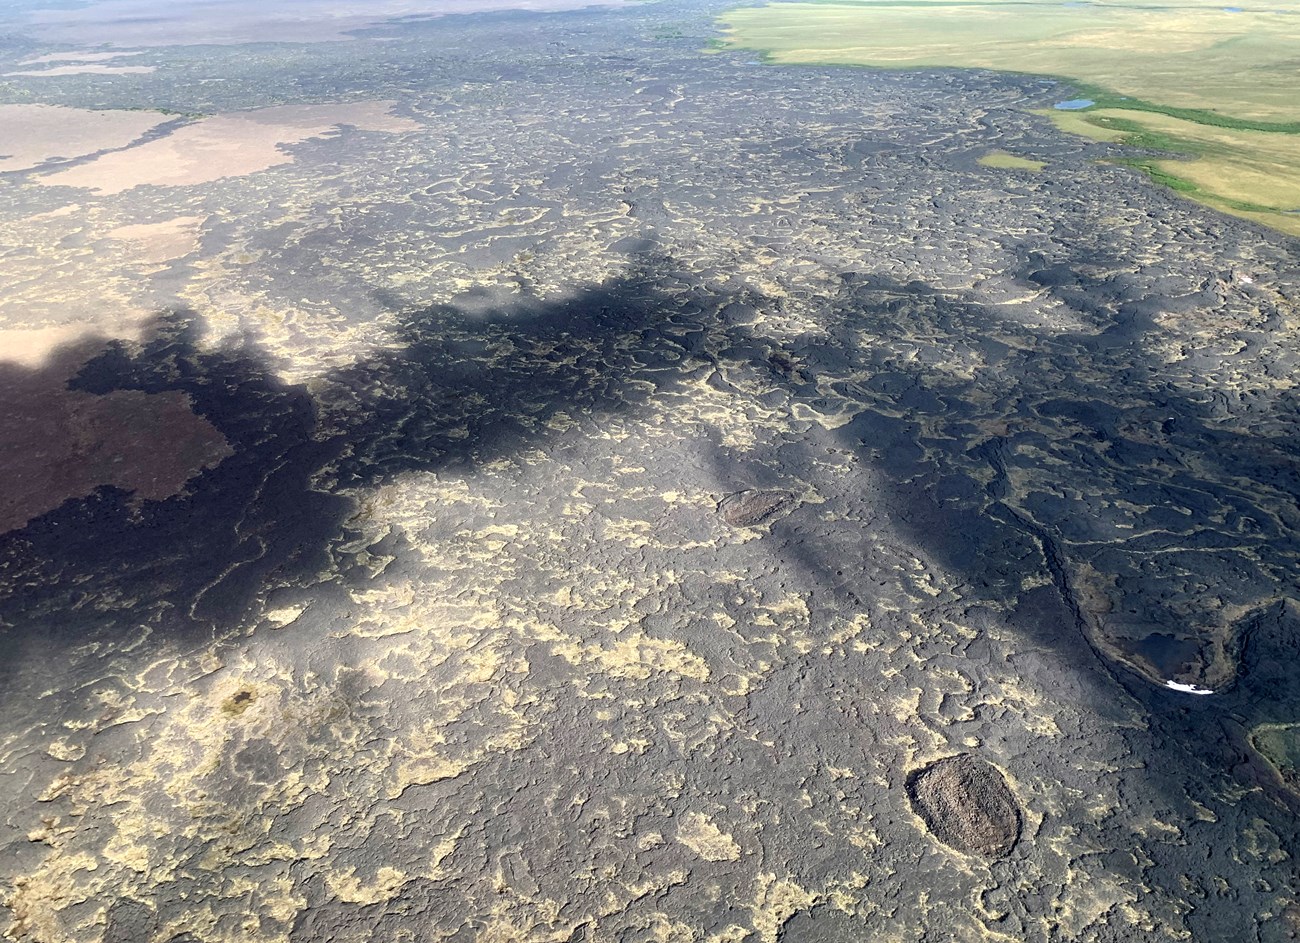 Aerial view of a large lava flow